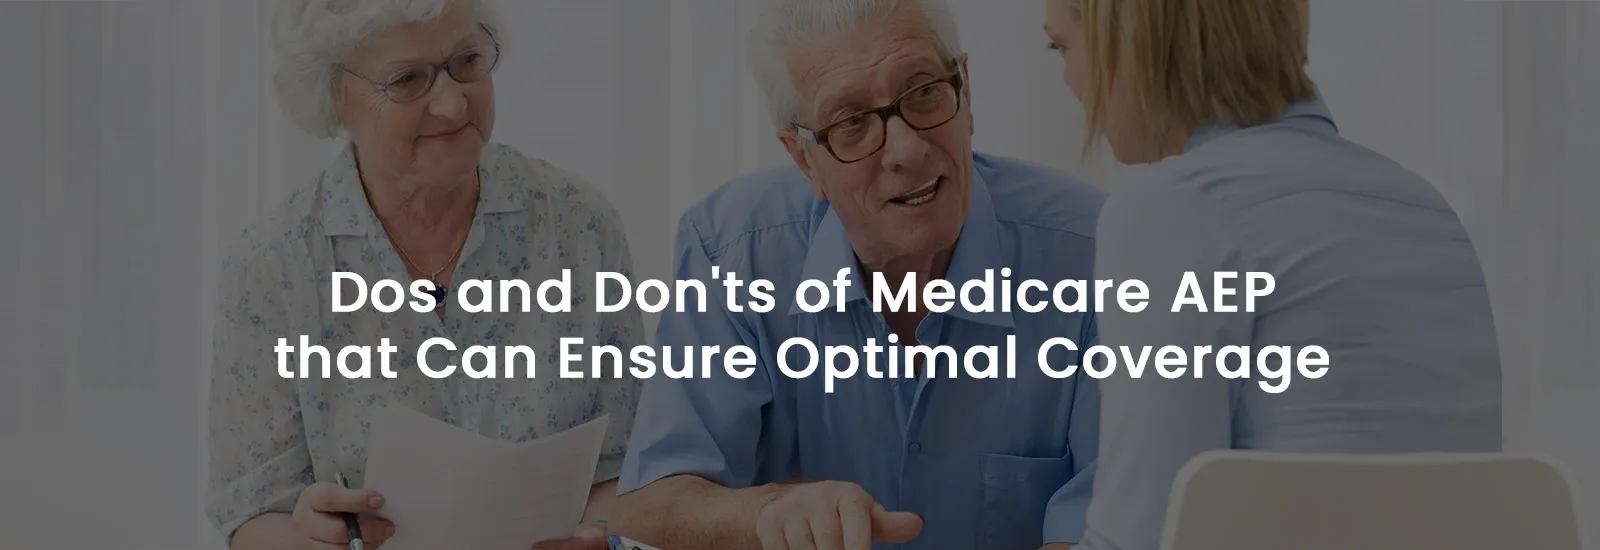 Dos and Don’ts of Medicare AEP that Can Ensure Optimal Coverage | Banner Image